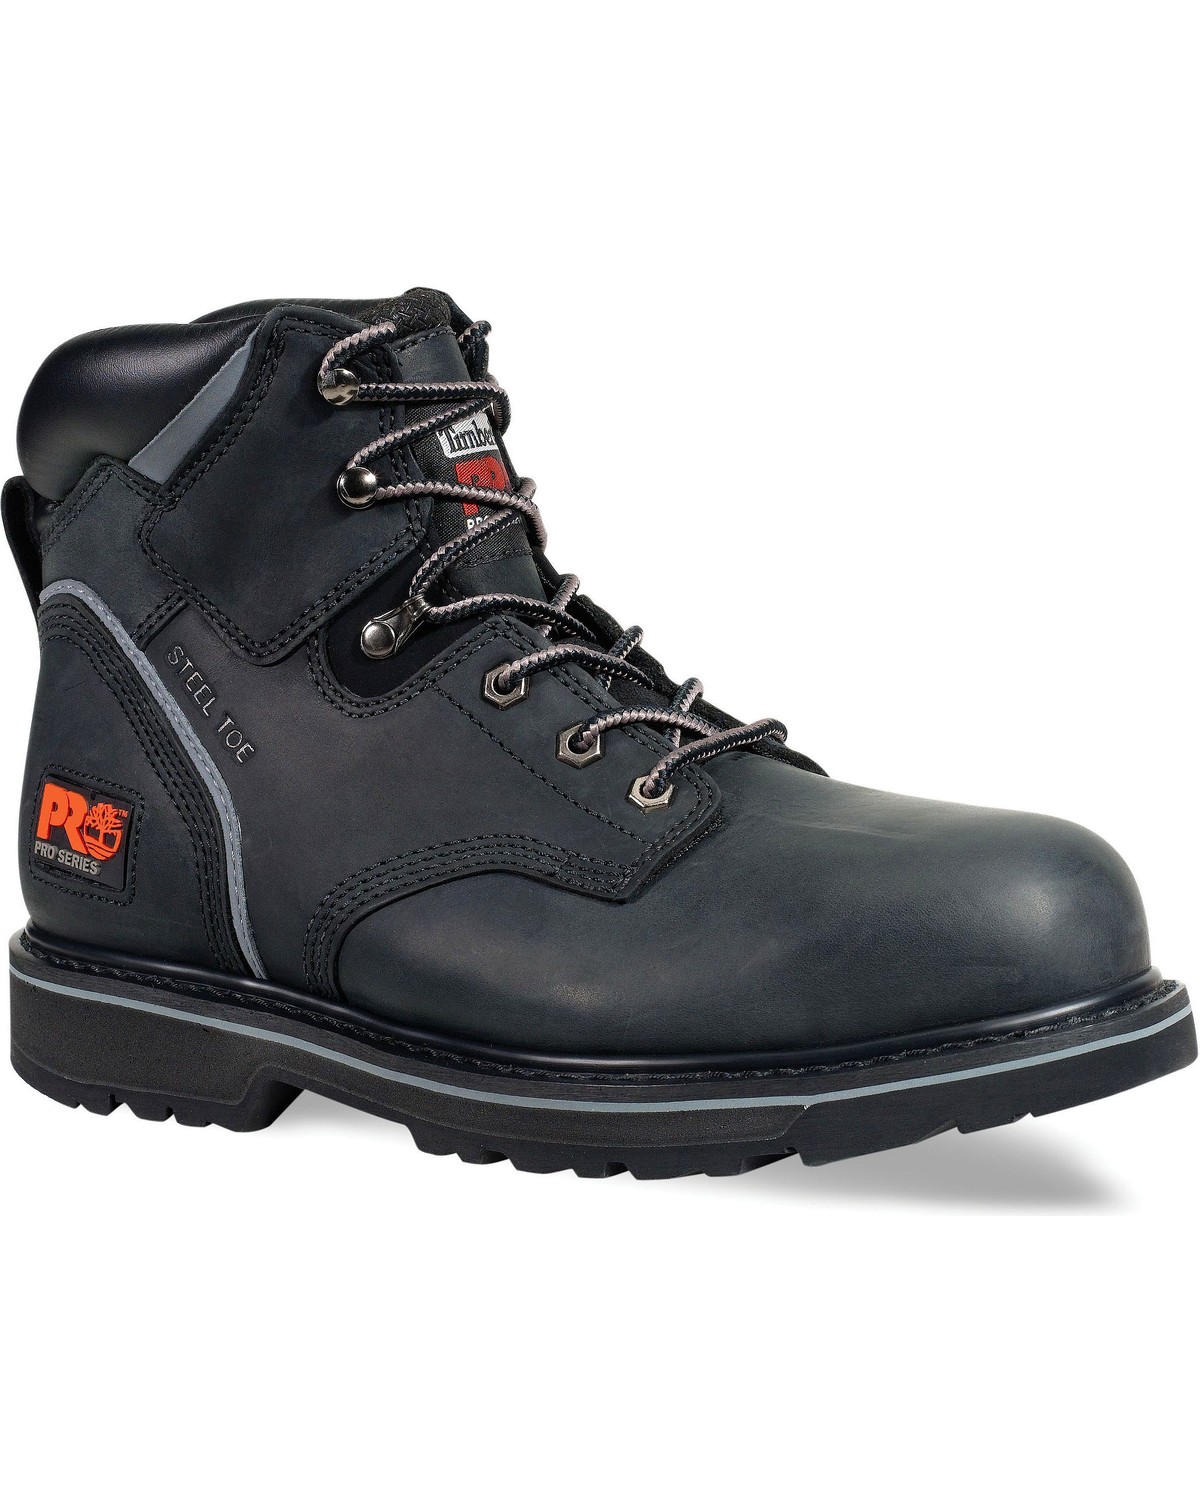 Timberland PRO Pit Boss 6" Lace-Up Work Boots - Steel Toe